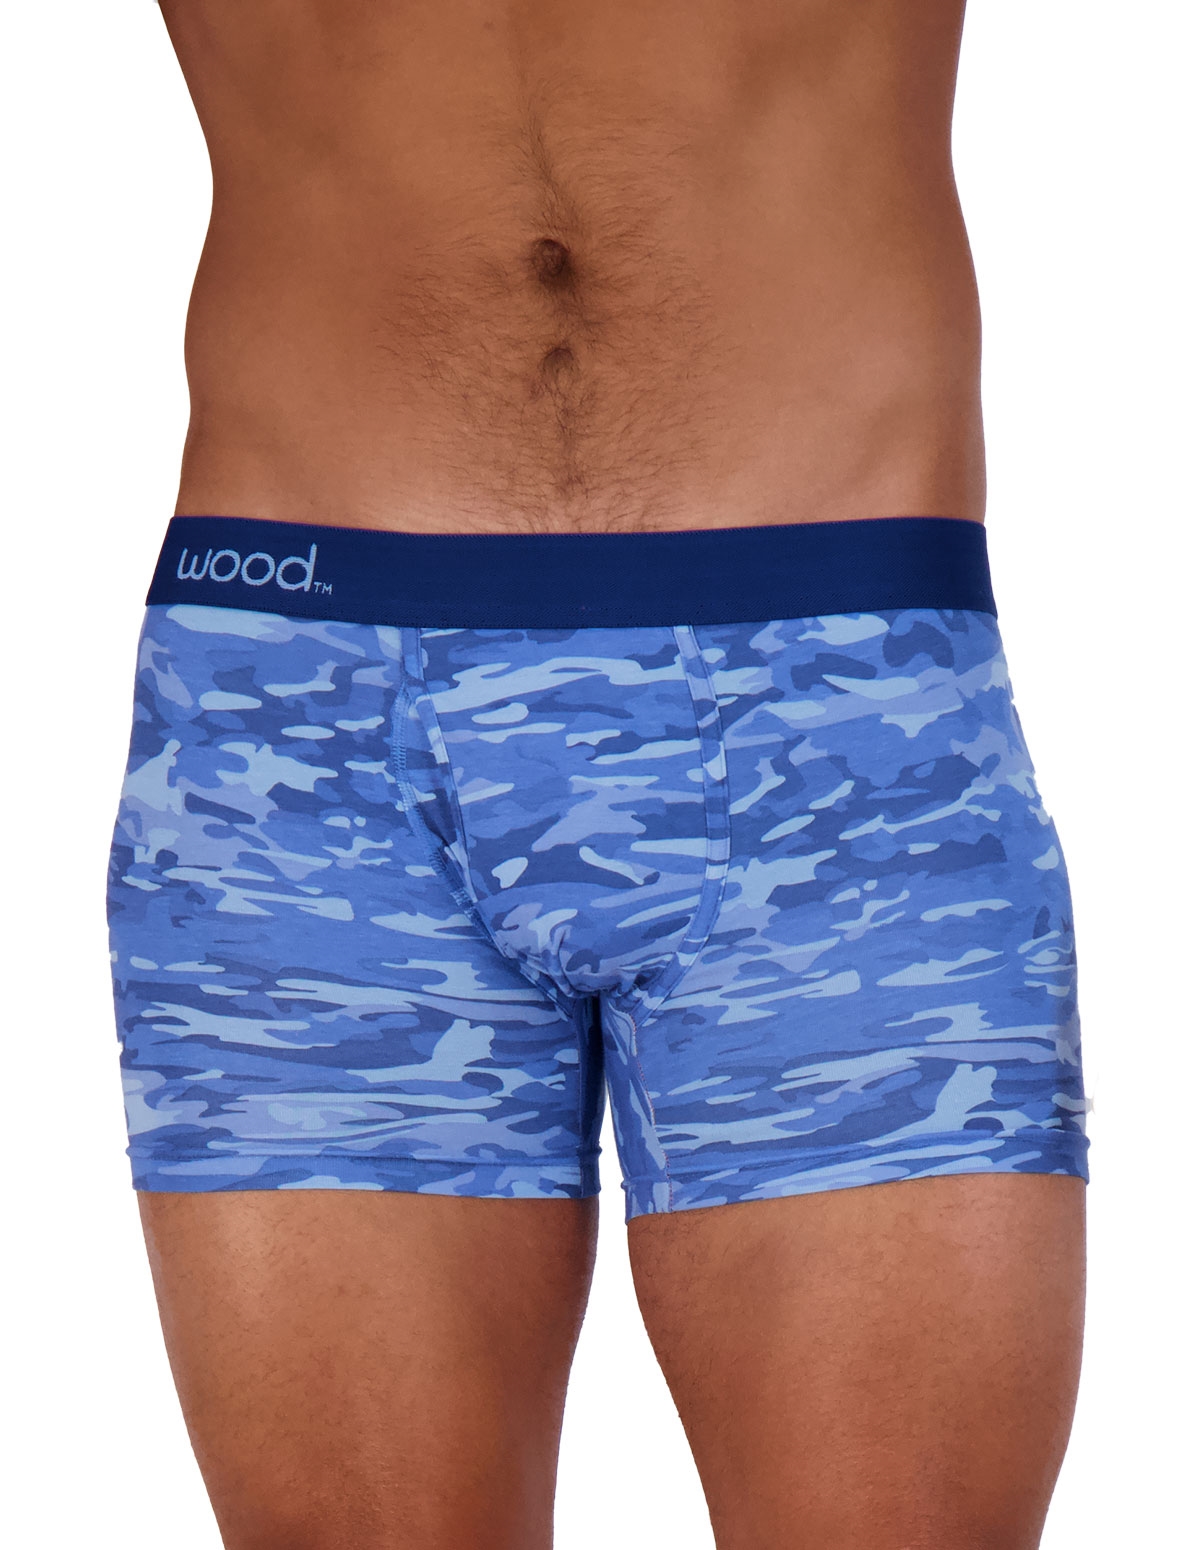 alternate image for Wood Boxer Brief W/ Fly - Blue Camo